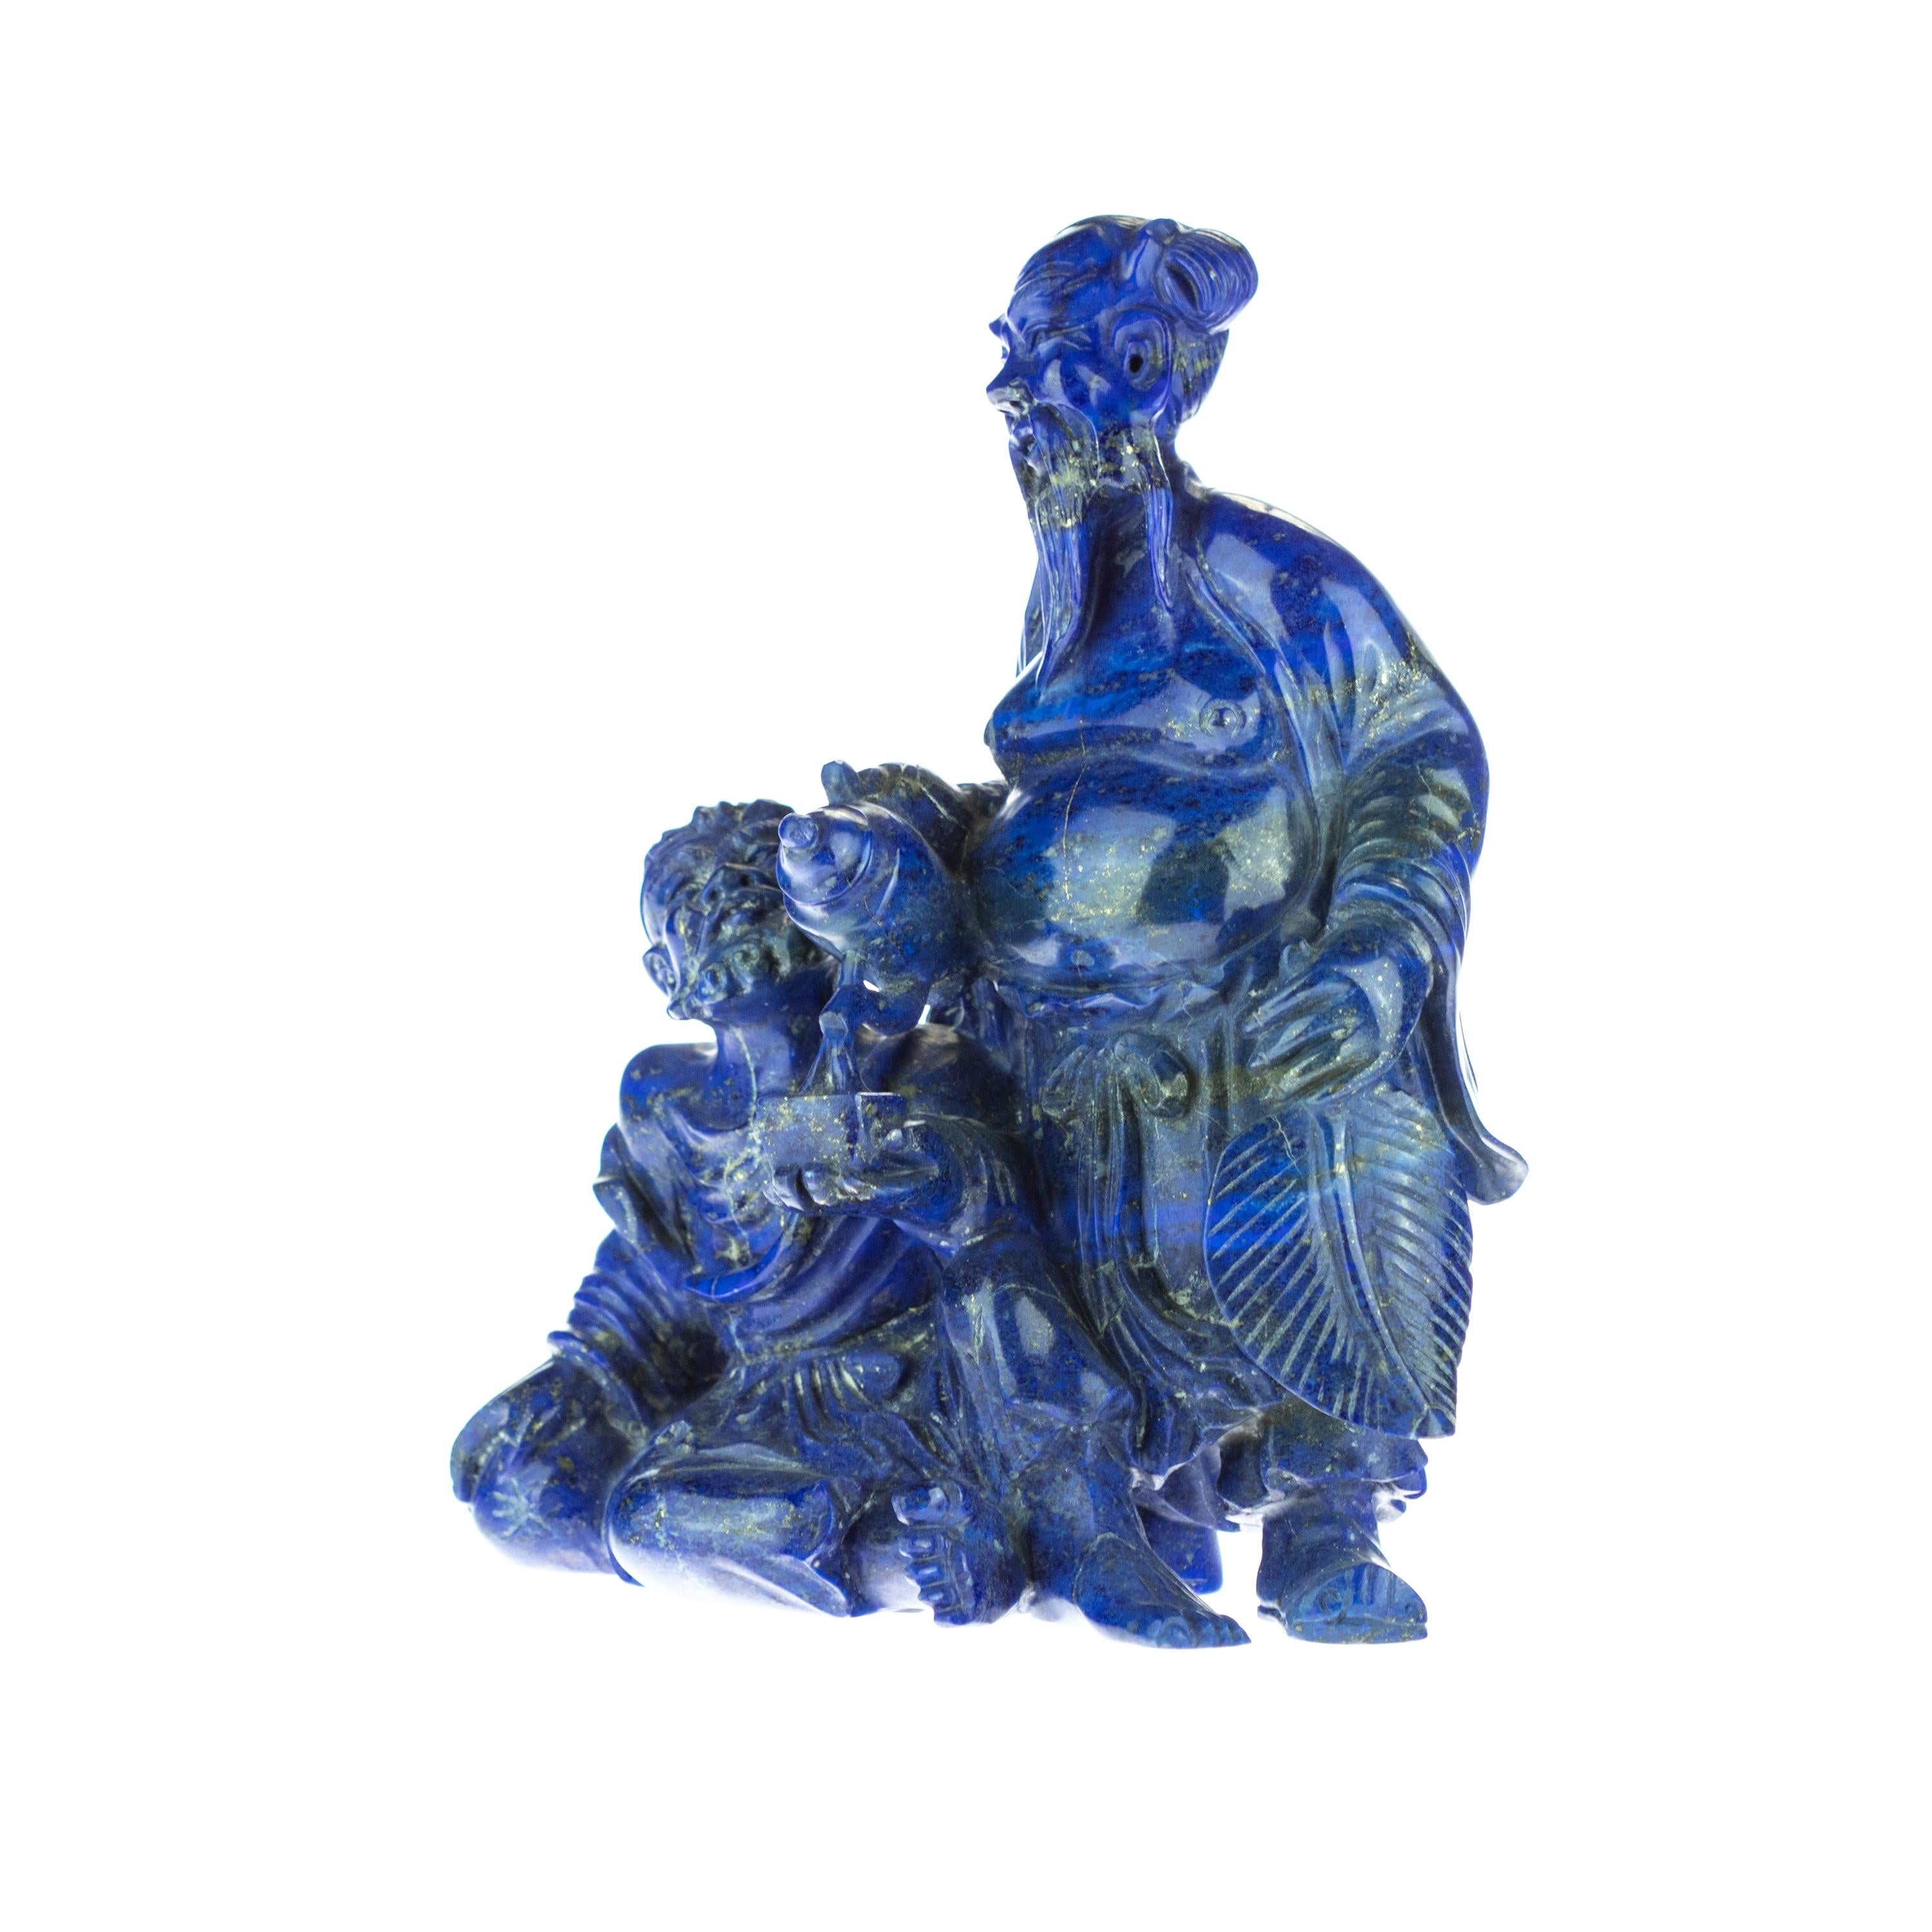 Chinese Export Lapis Lazuli Wise Men Figurine Carved Man Artisanal Statue Handmade Sculpture For Sale